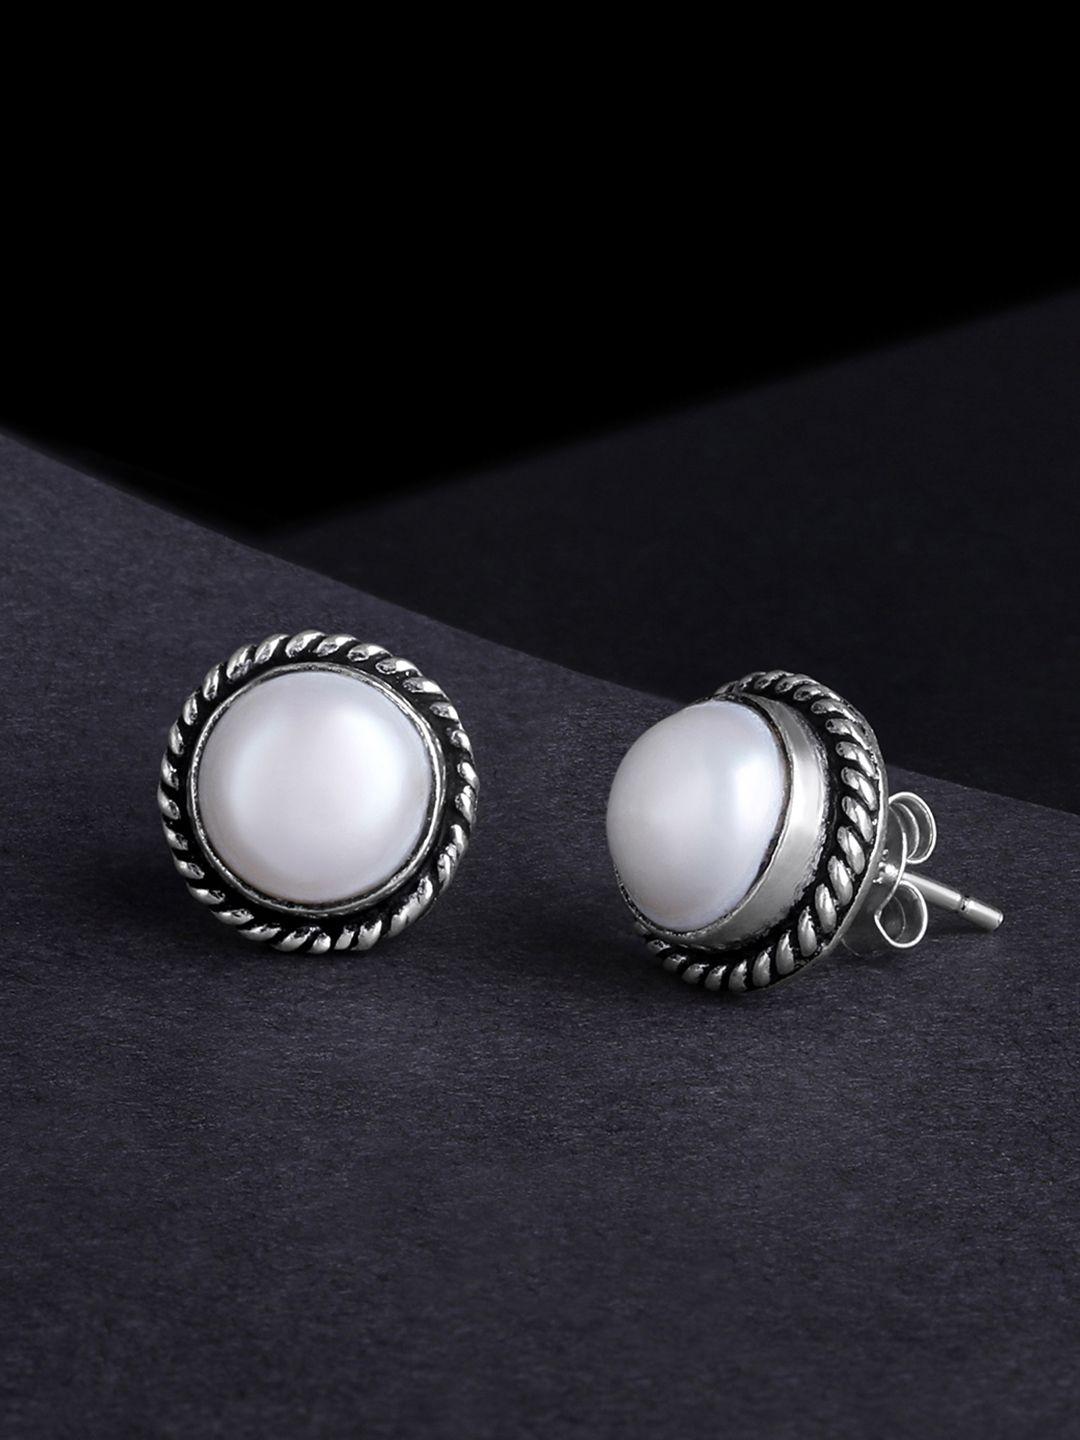 silvora by peora white & silver plated circular studs earrings